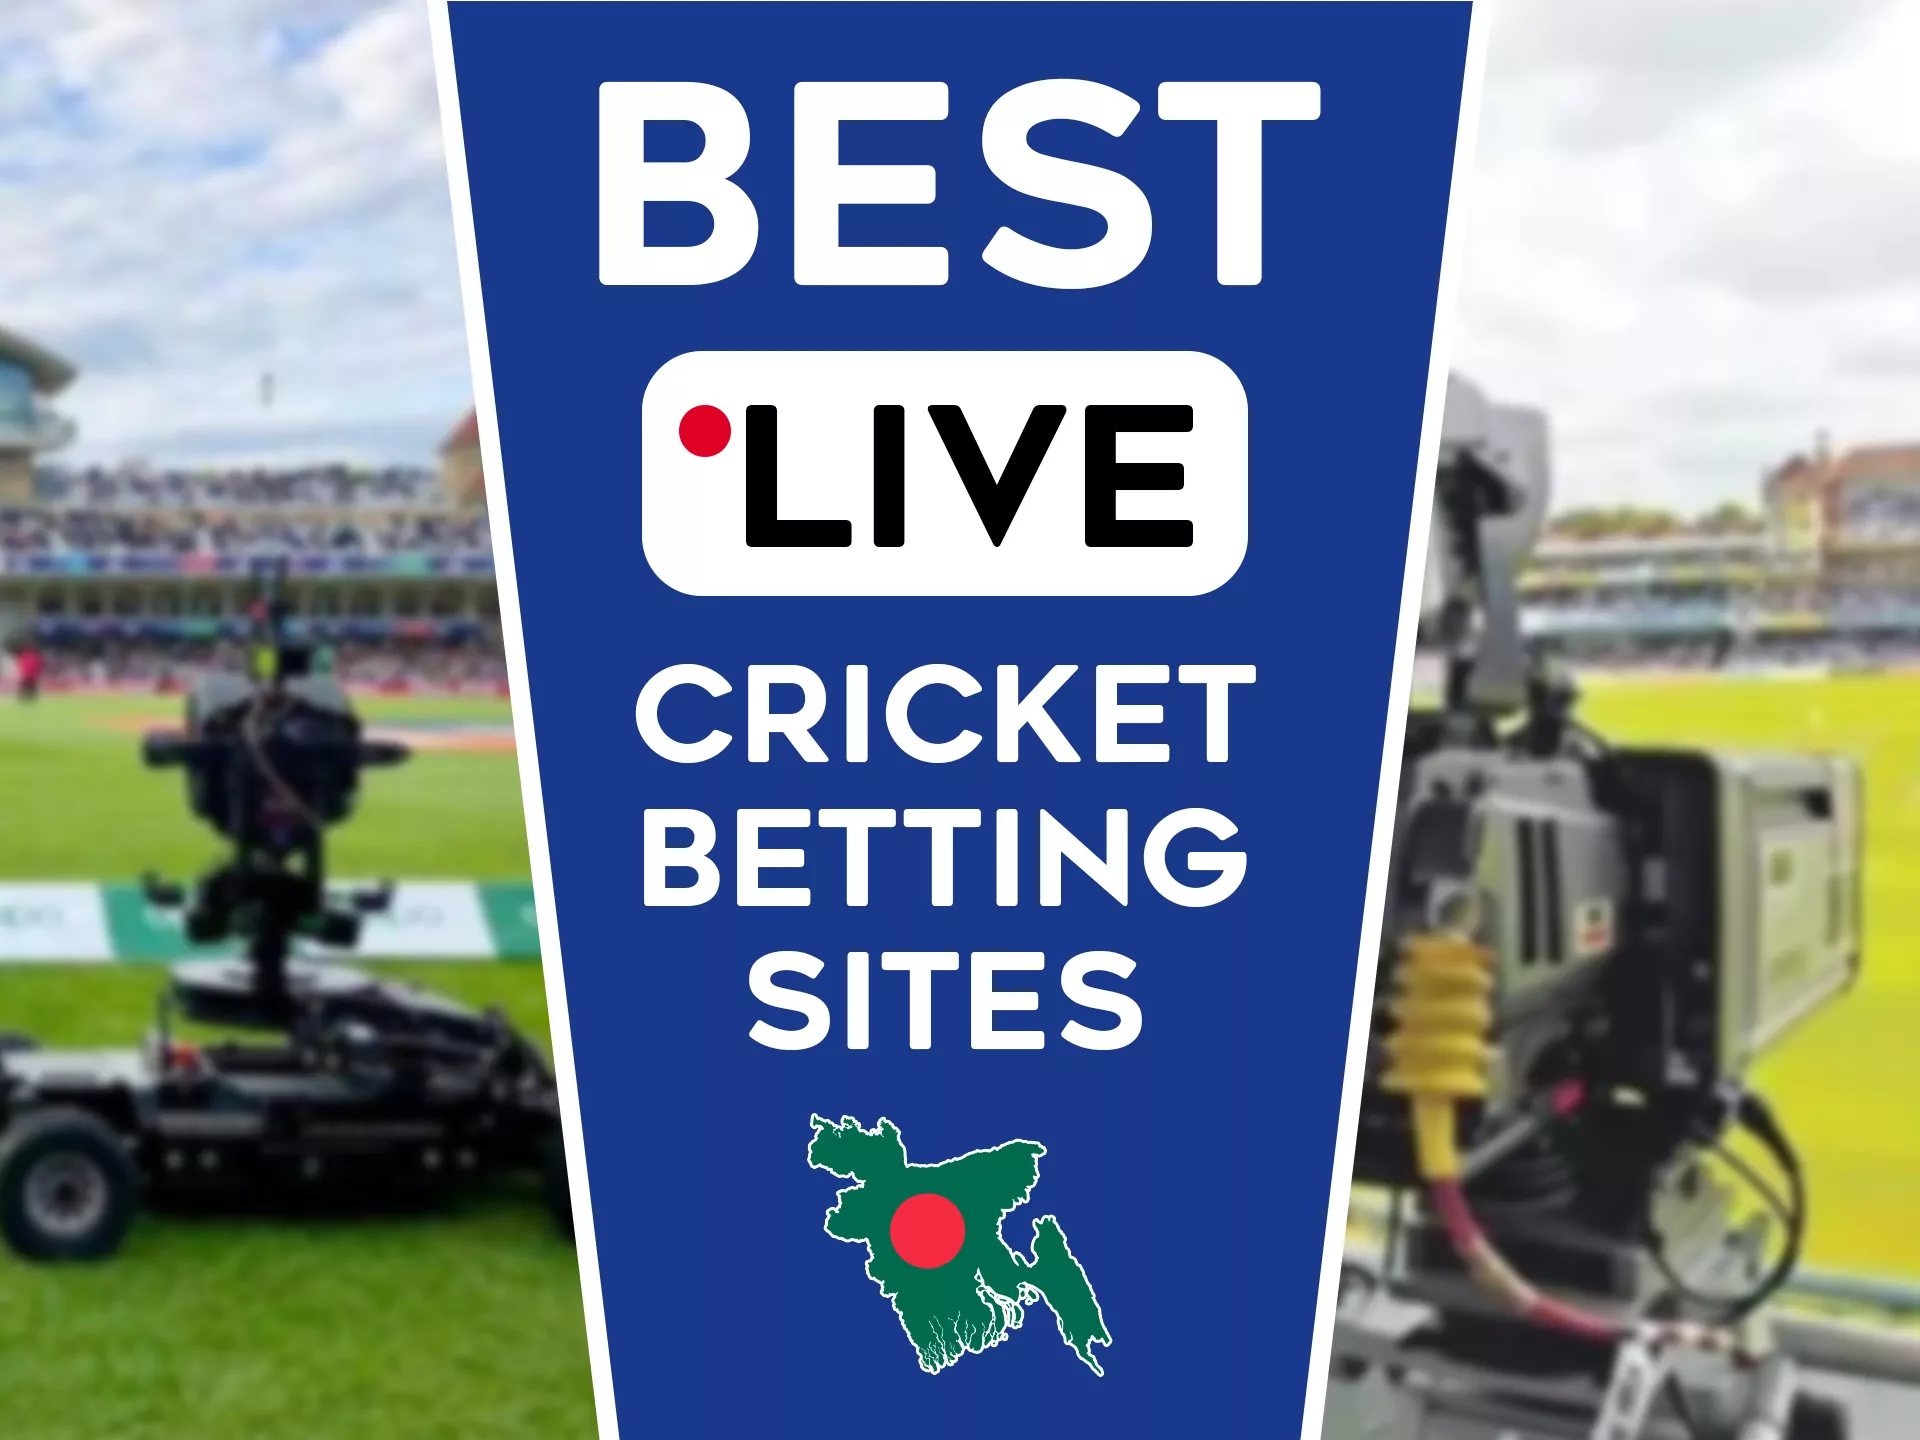 Best cricket betting sites in Bangaldesh by Bettingonlinebd.